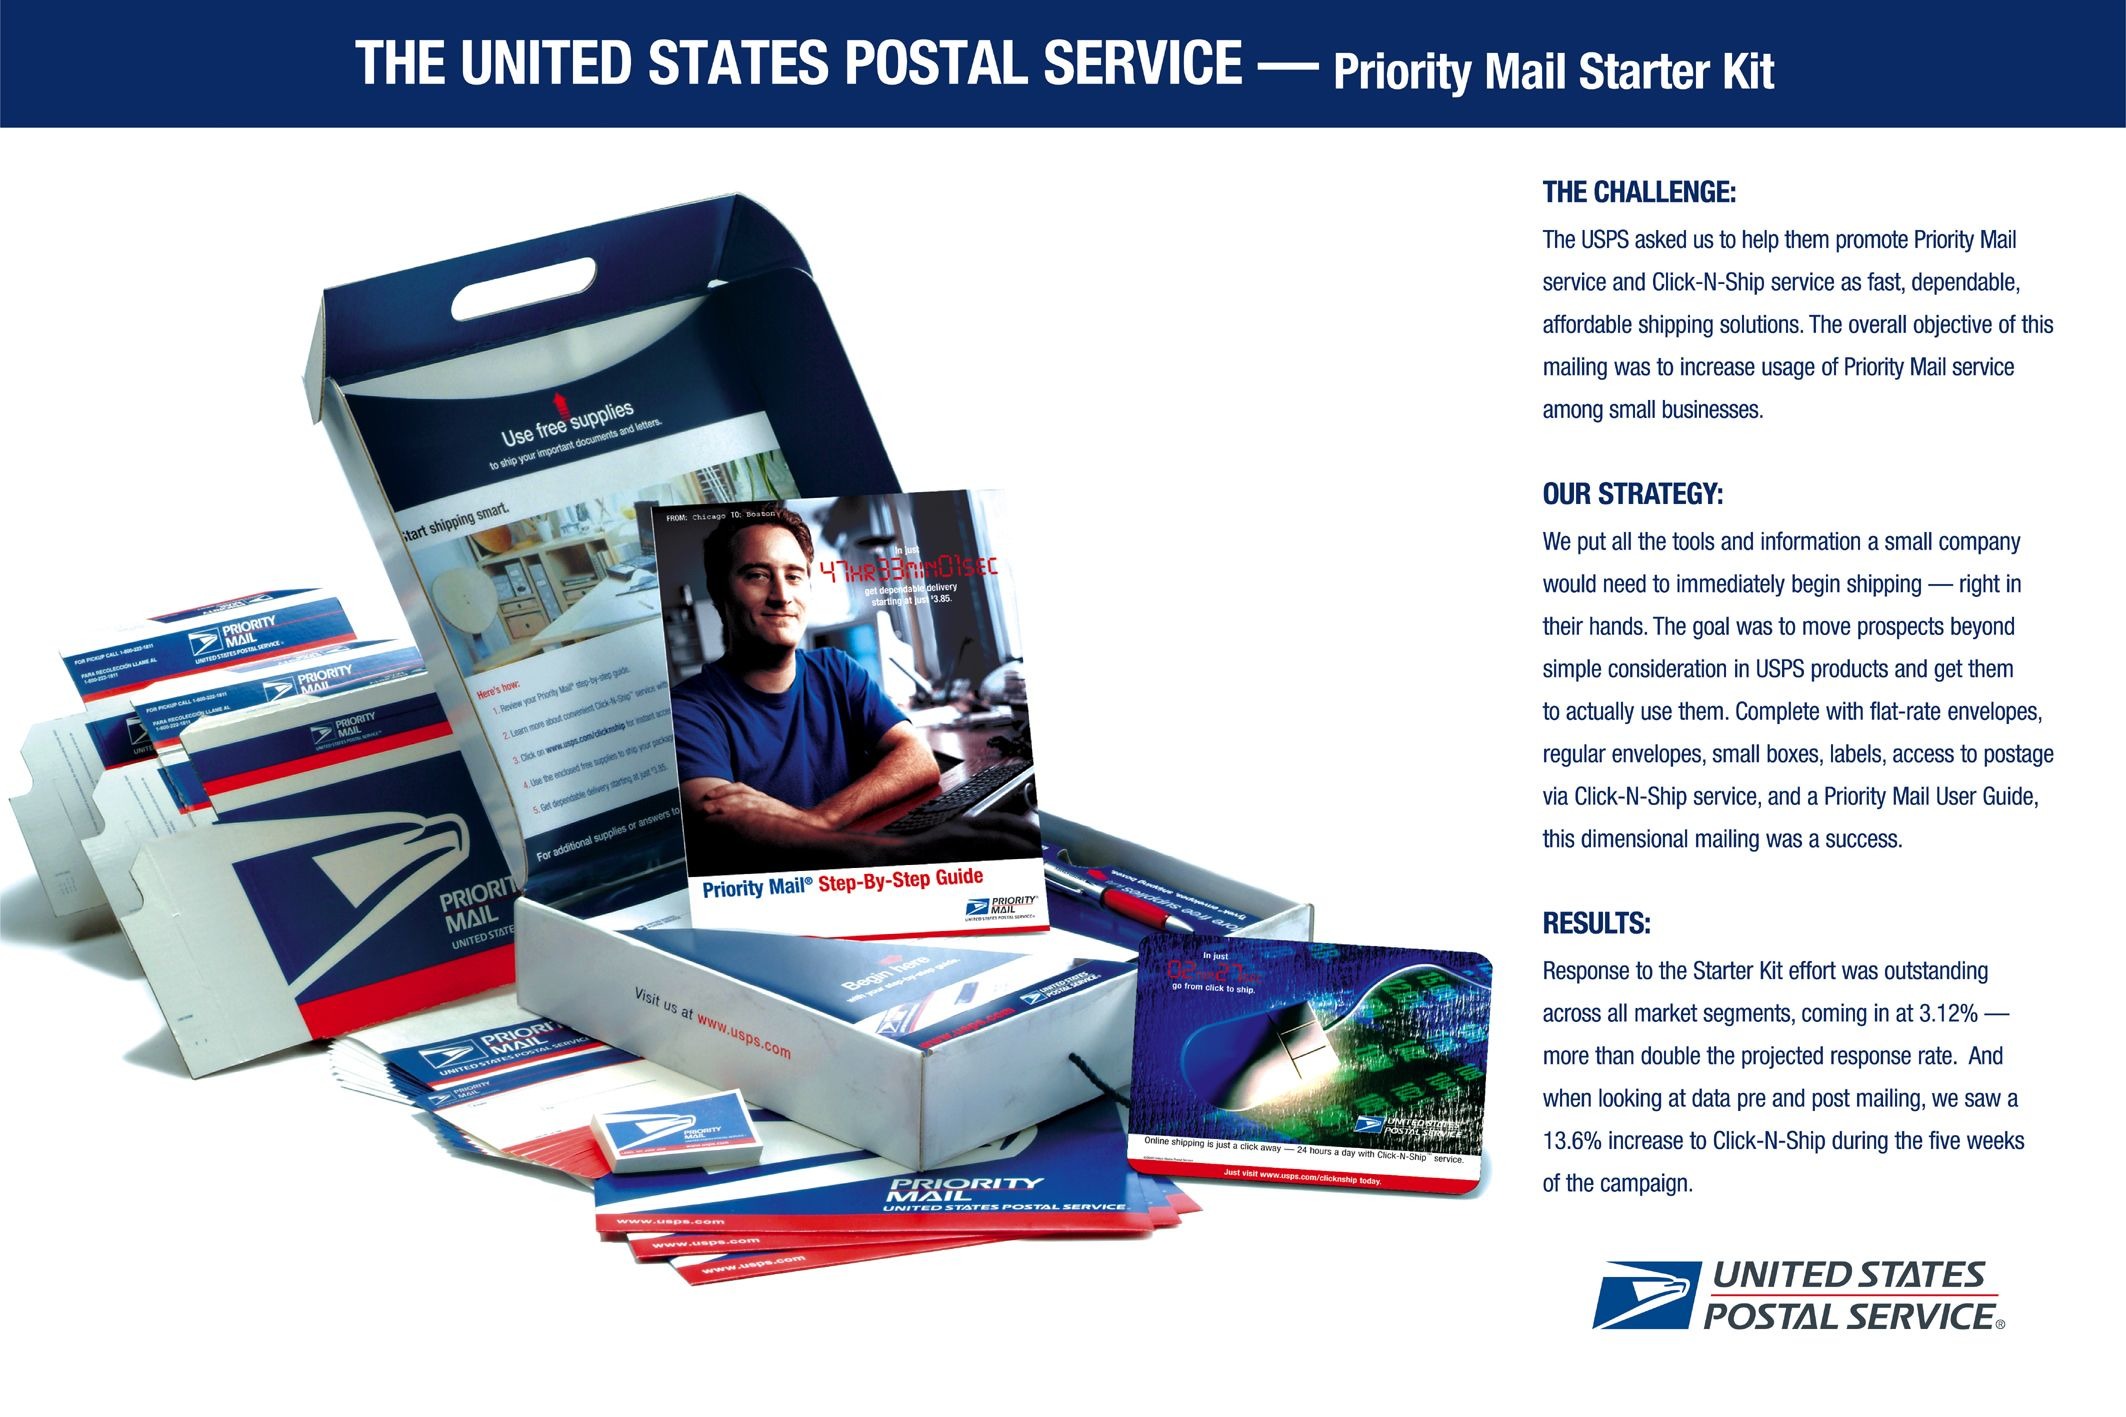 PRIORITY MAIL SERVICE